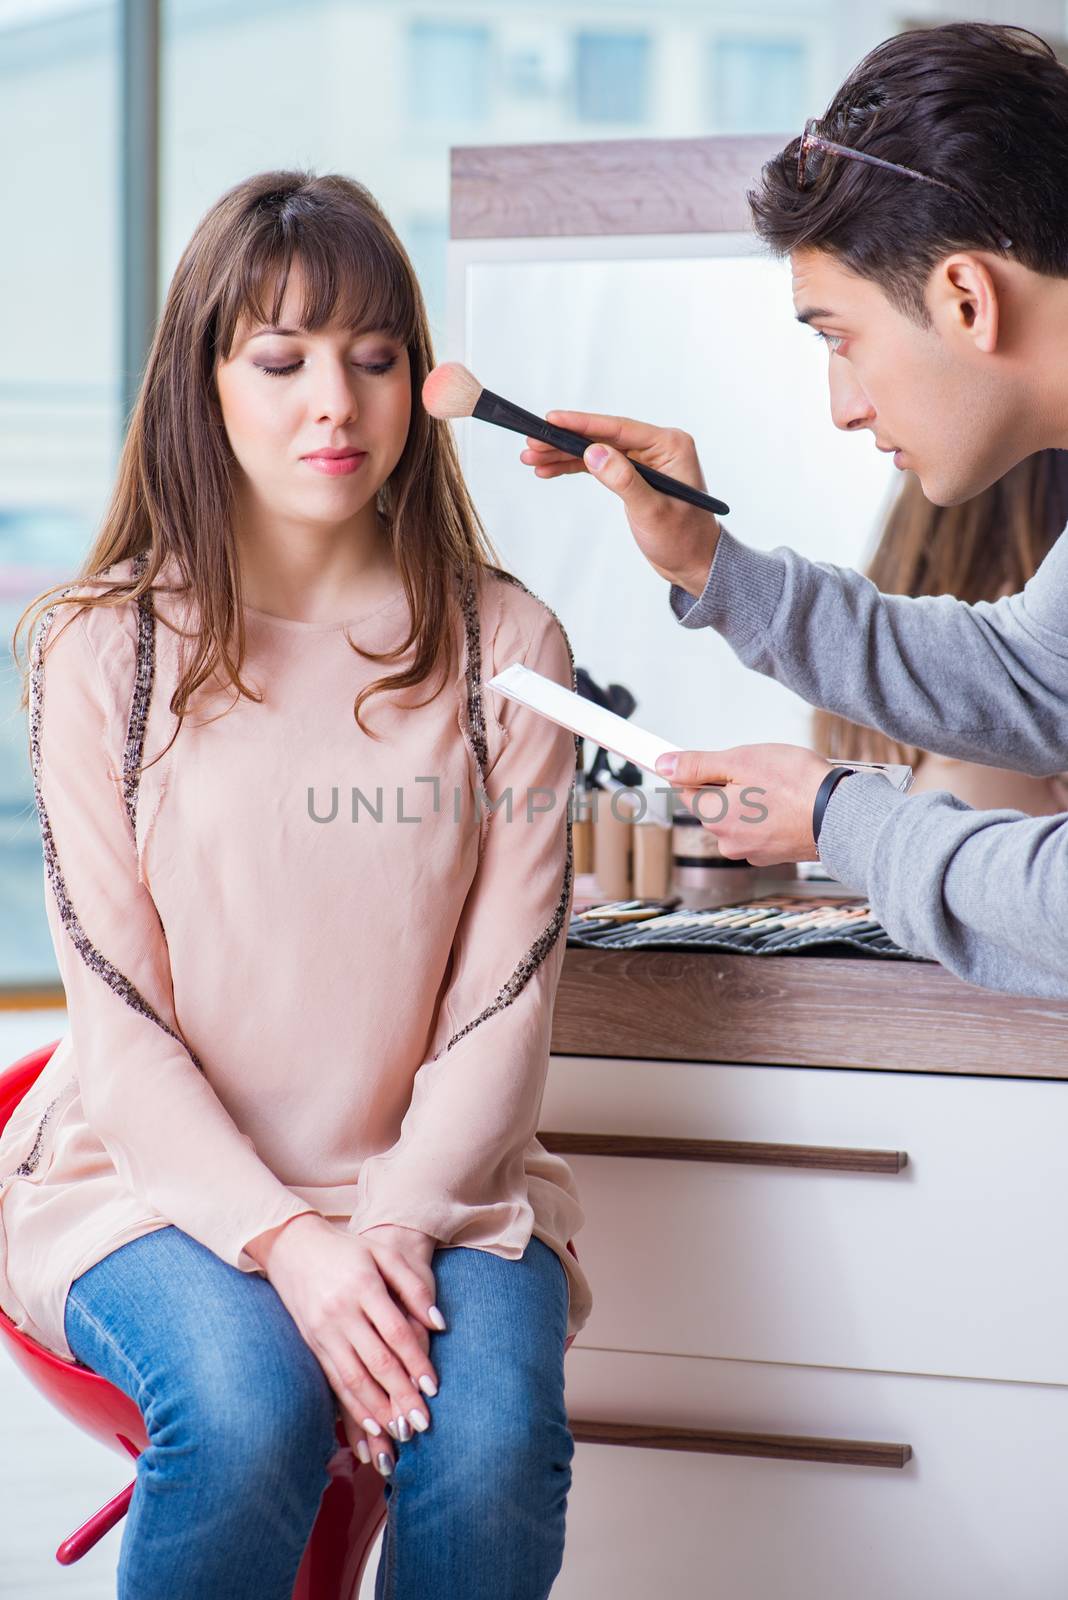 Man doing make-up for cute woman in beauty salon by Elnur